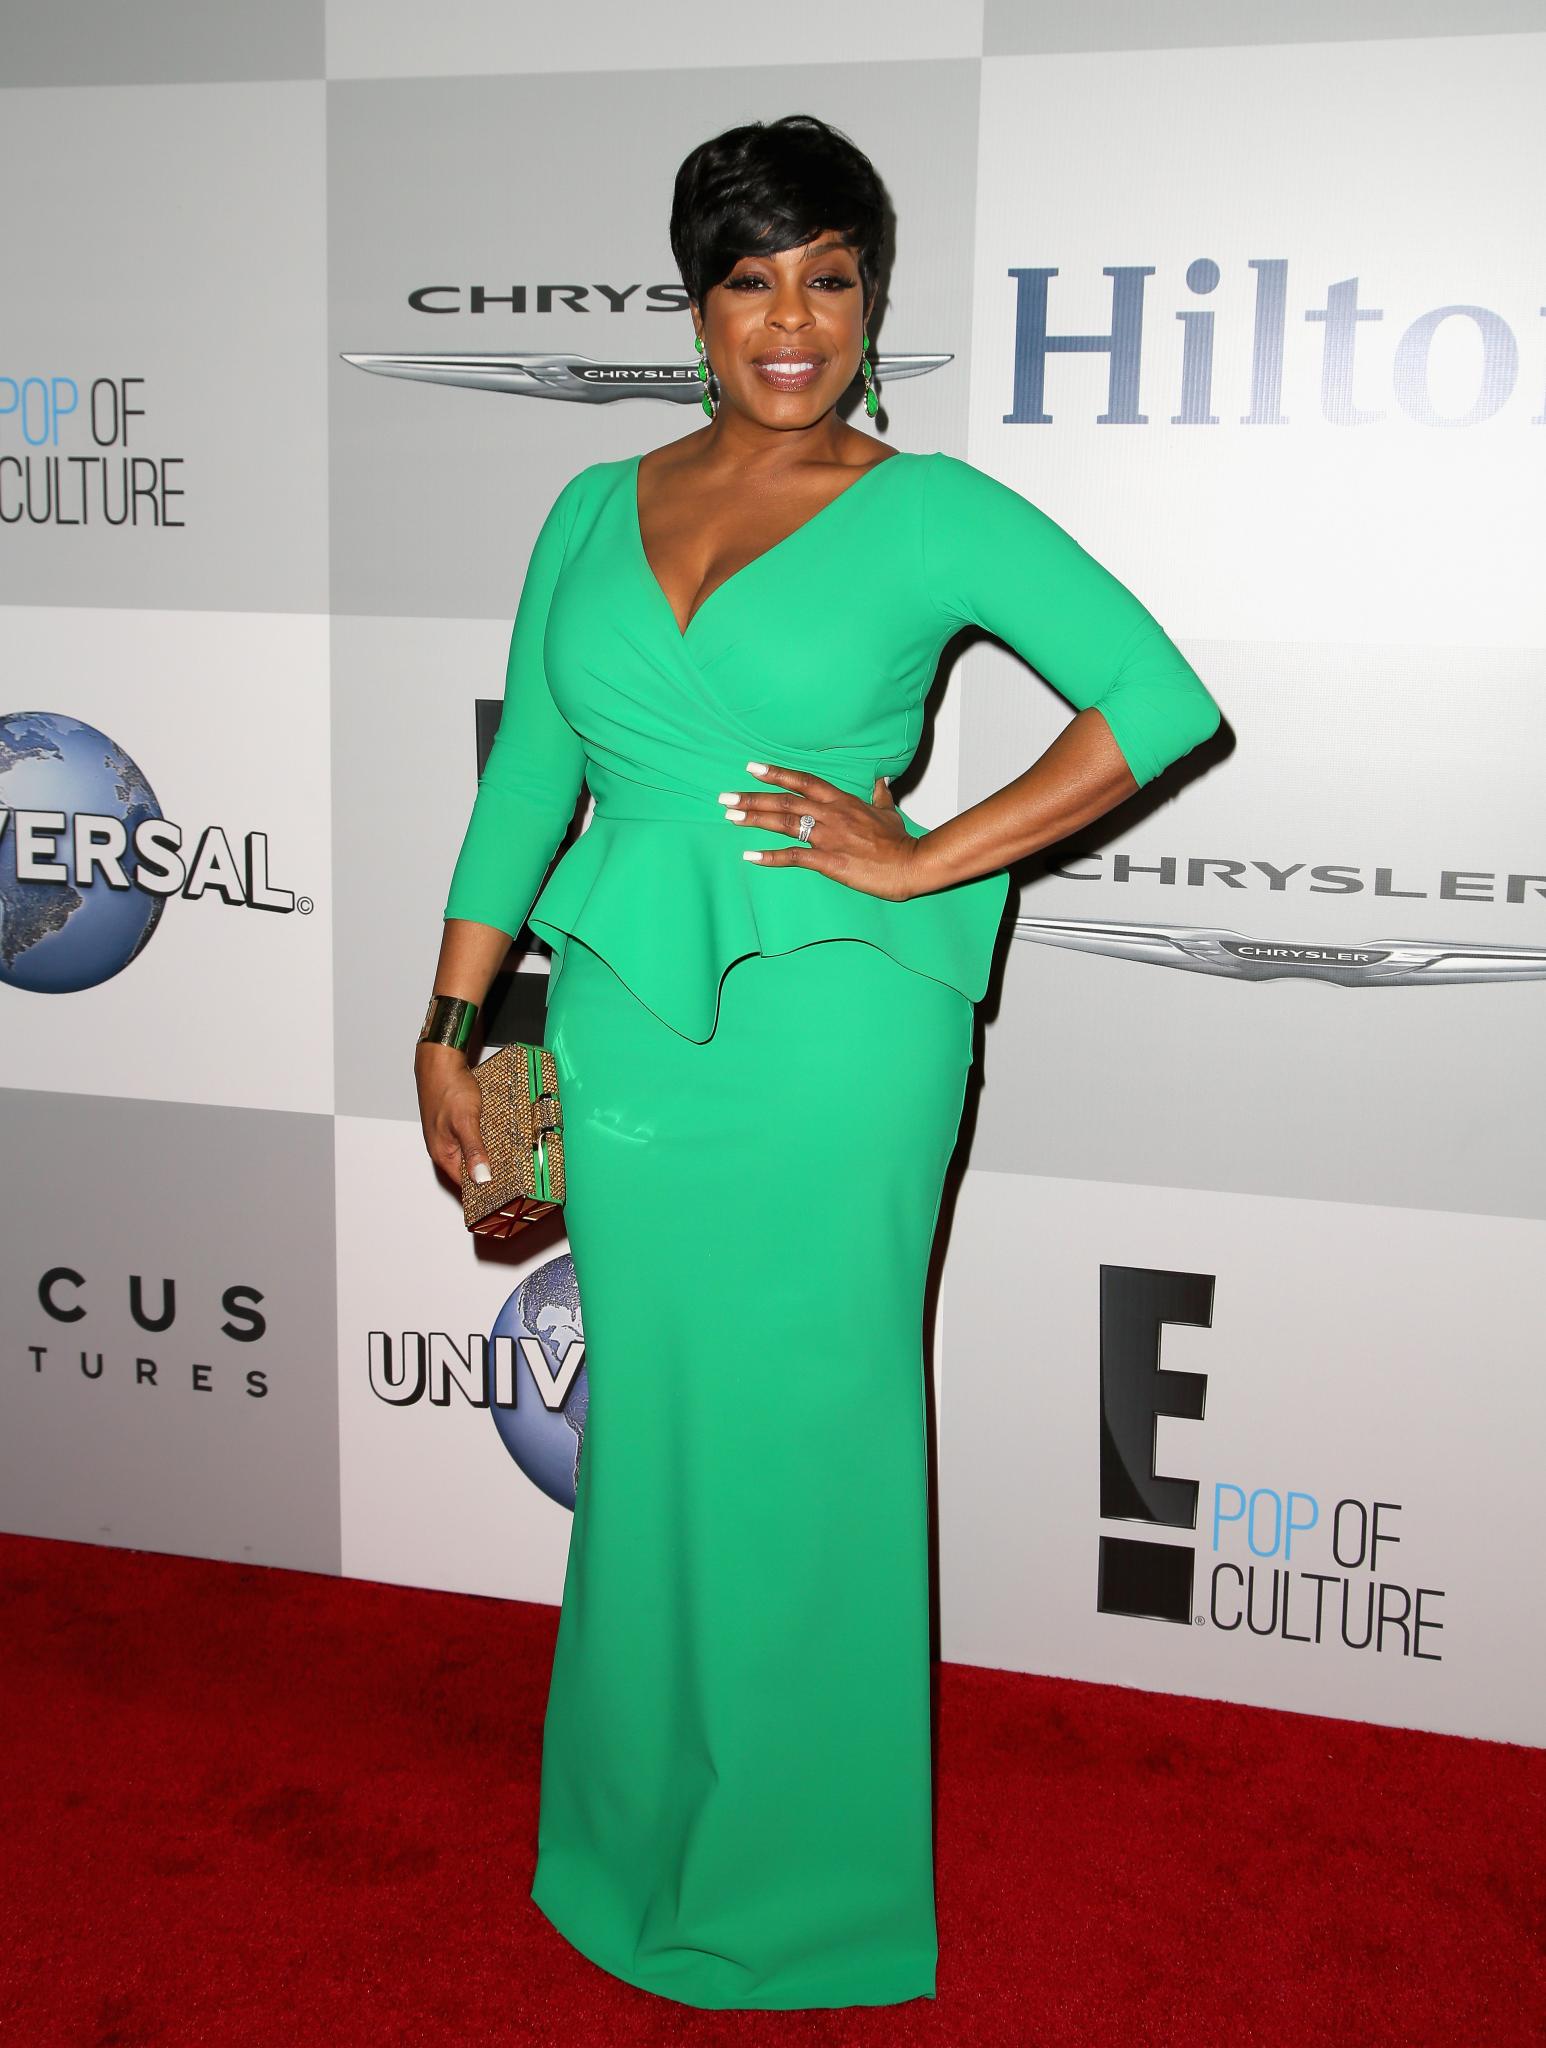 Hollywood Hues: 20 Bold Yet Daring Colors Hollywood Actresses Have Pulled Off